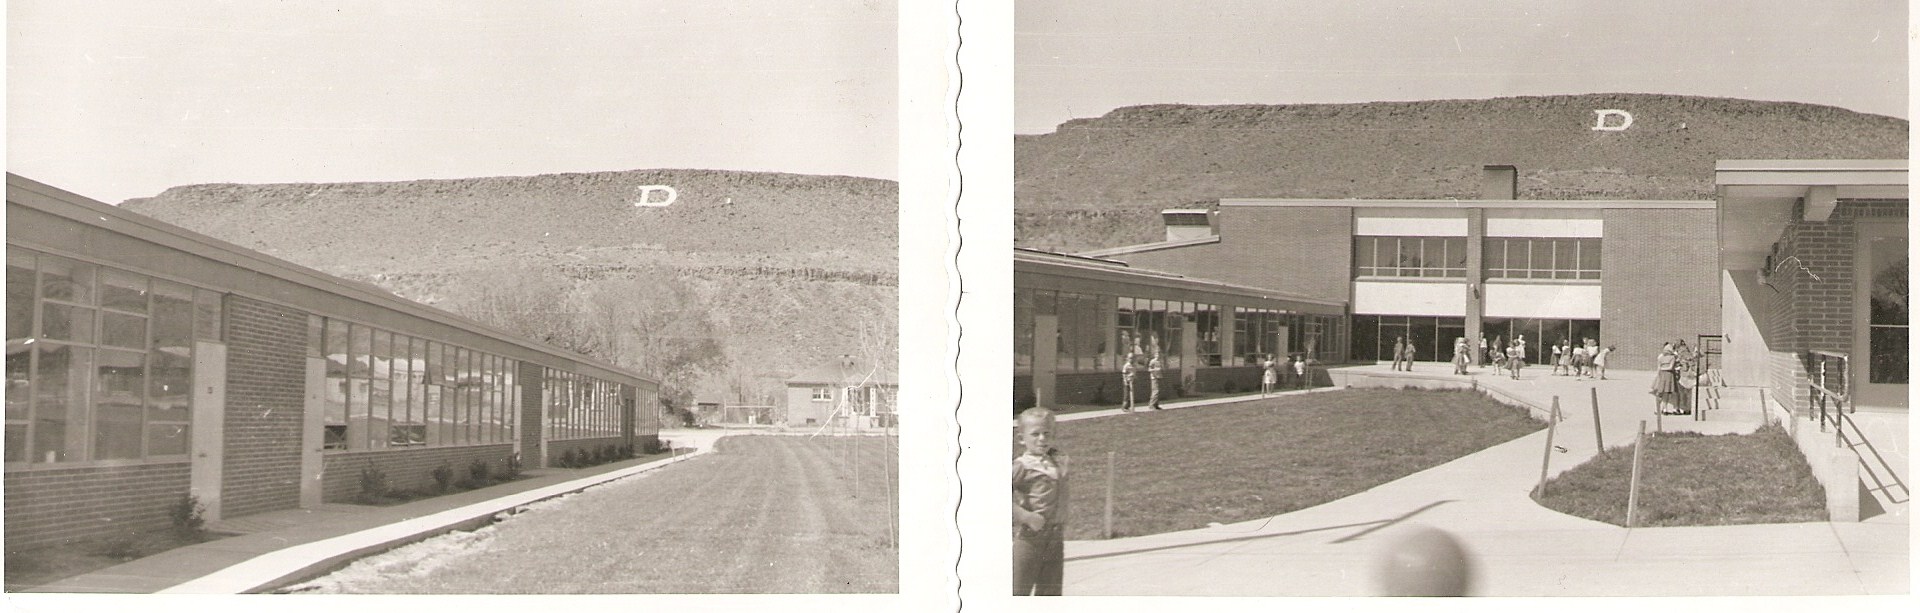 WCHS-00295 Side and patio of the new West Elementary School in 1956